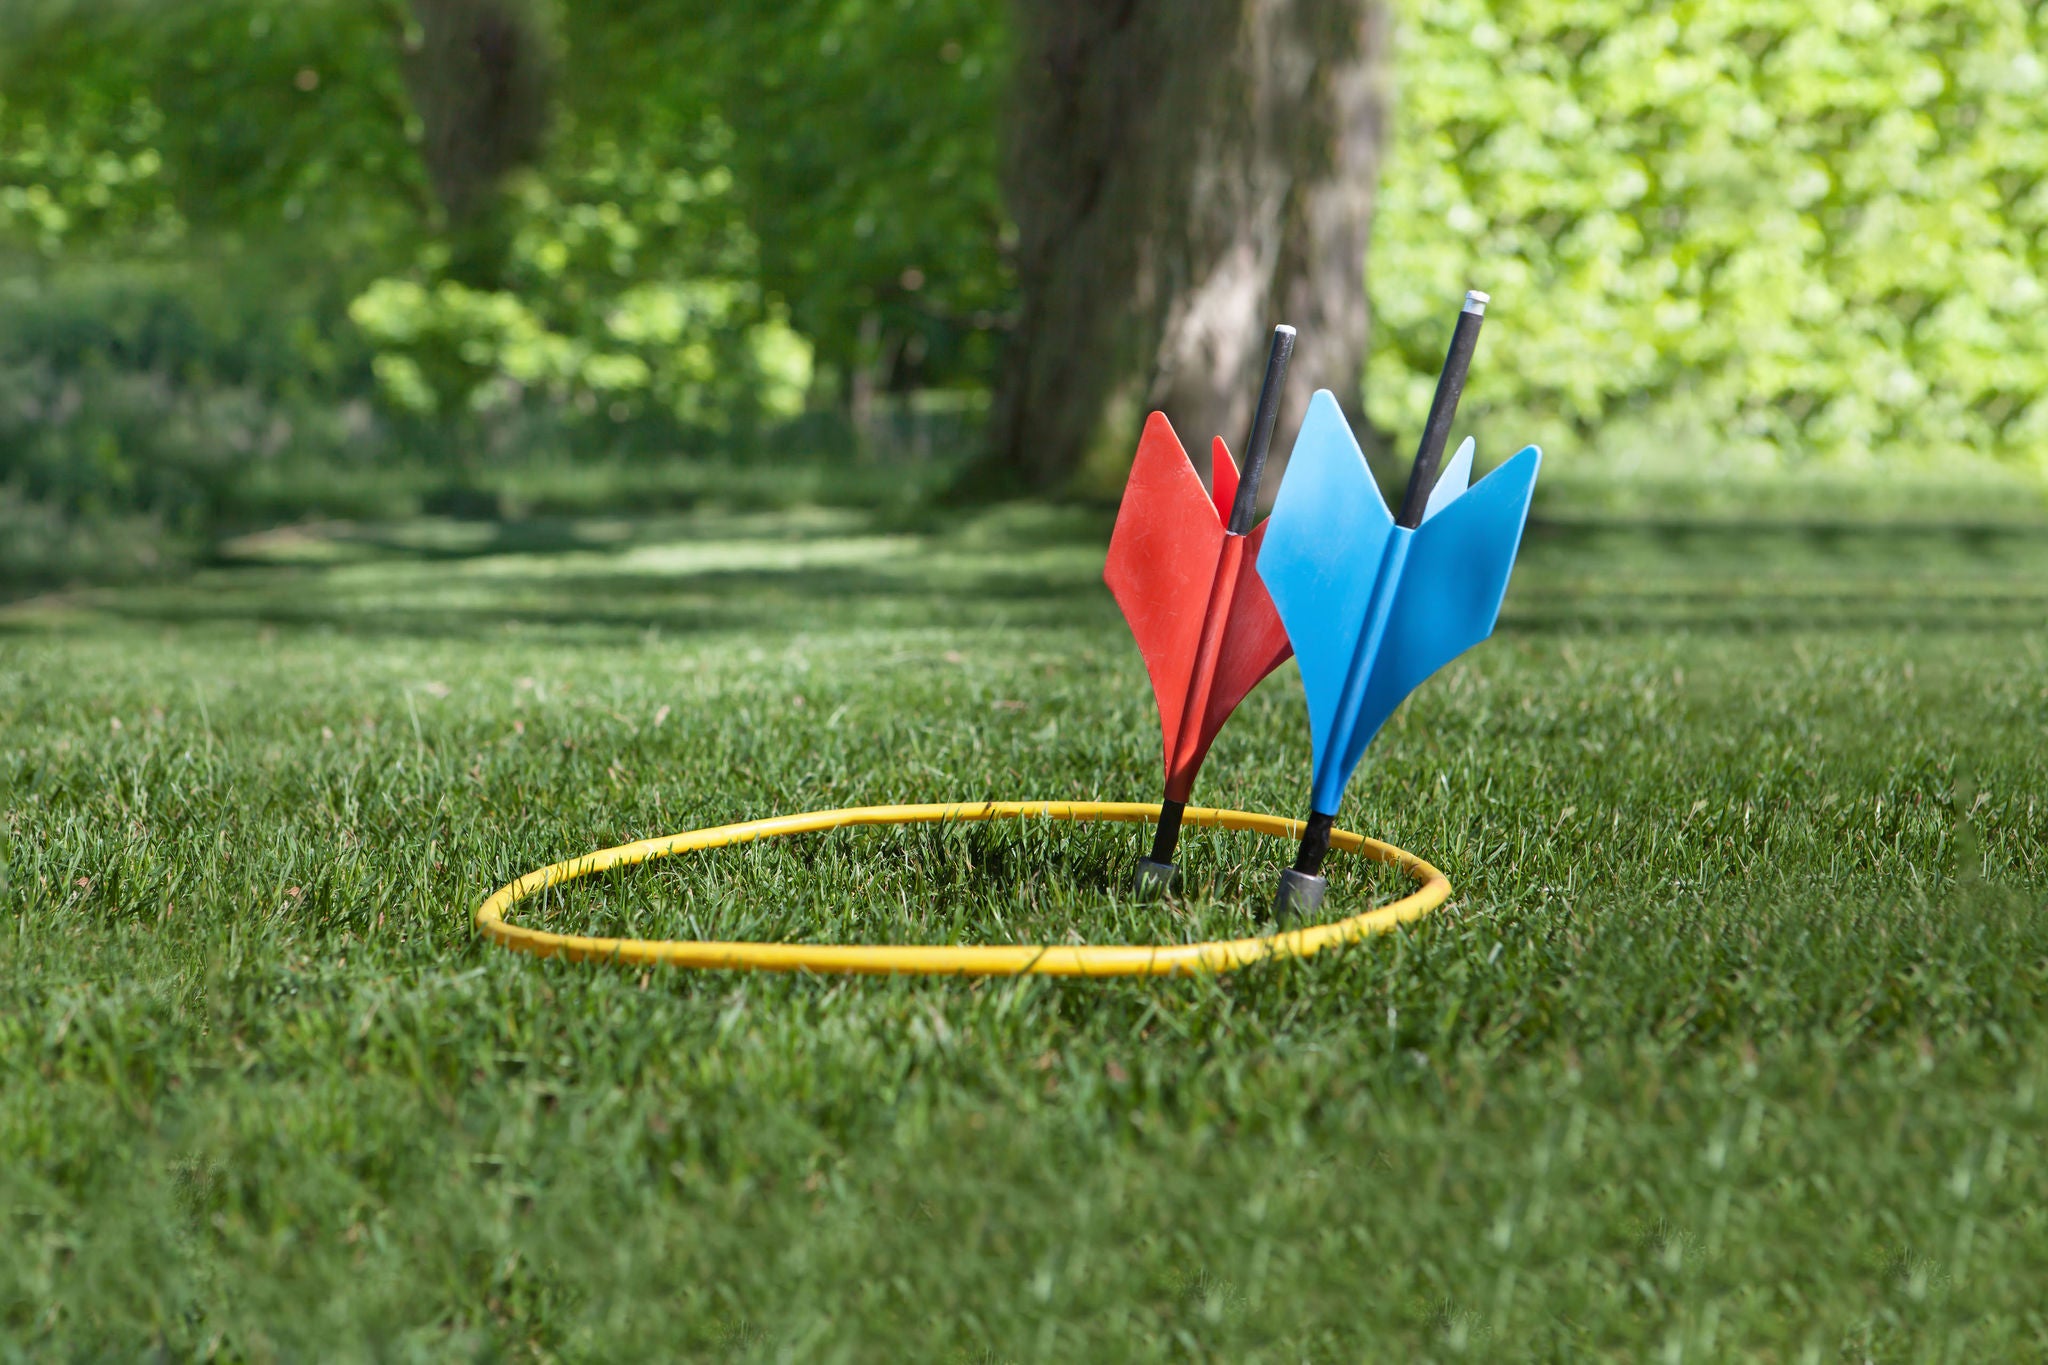 a shot of some vintage lawn darts somtimes called JARTS. One of each  color inside the yellow ring in a back yard setting.